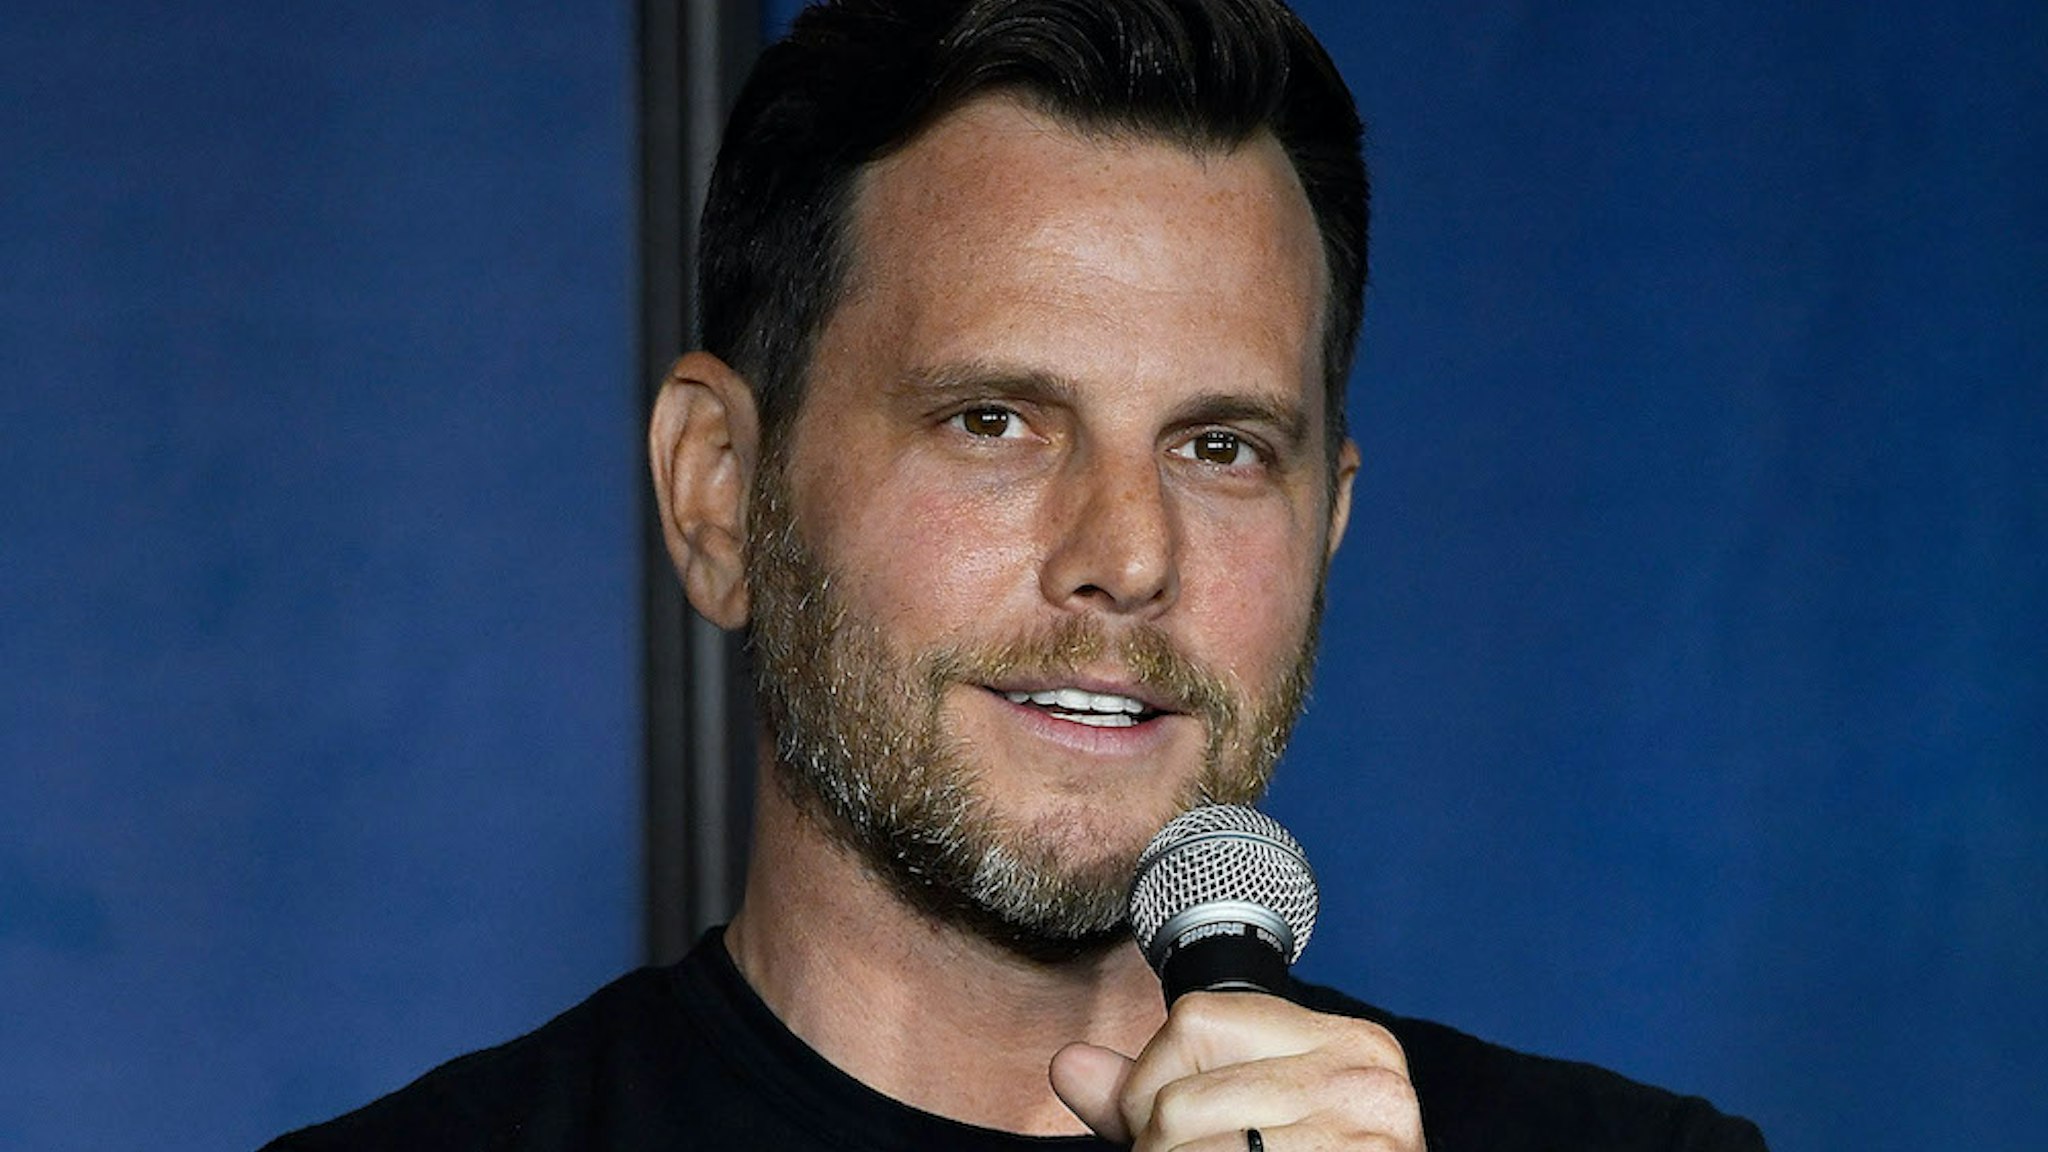 Politcal commentator, comedian and television personality Dave Rubin performs during his appearance at The Ice House Comedy Club on March 8, 2019 in Pasadena, California. (Photo by Michael S. Schwartz/Getty Images)